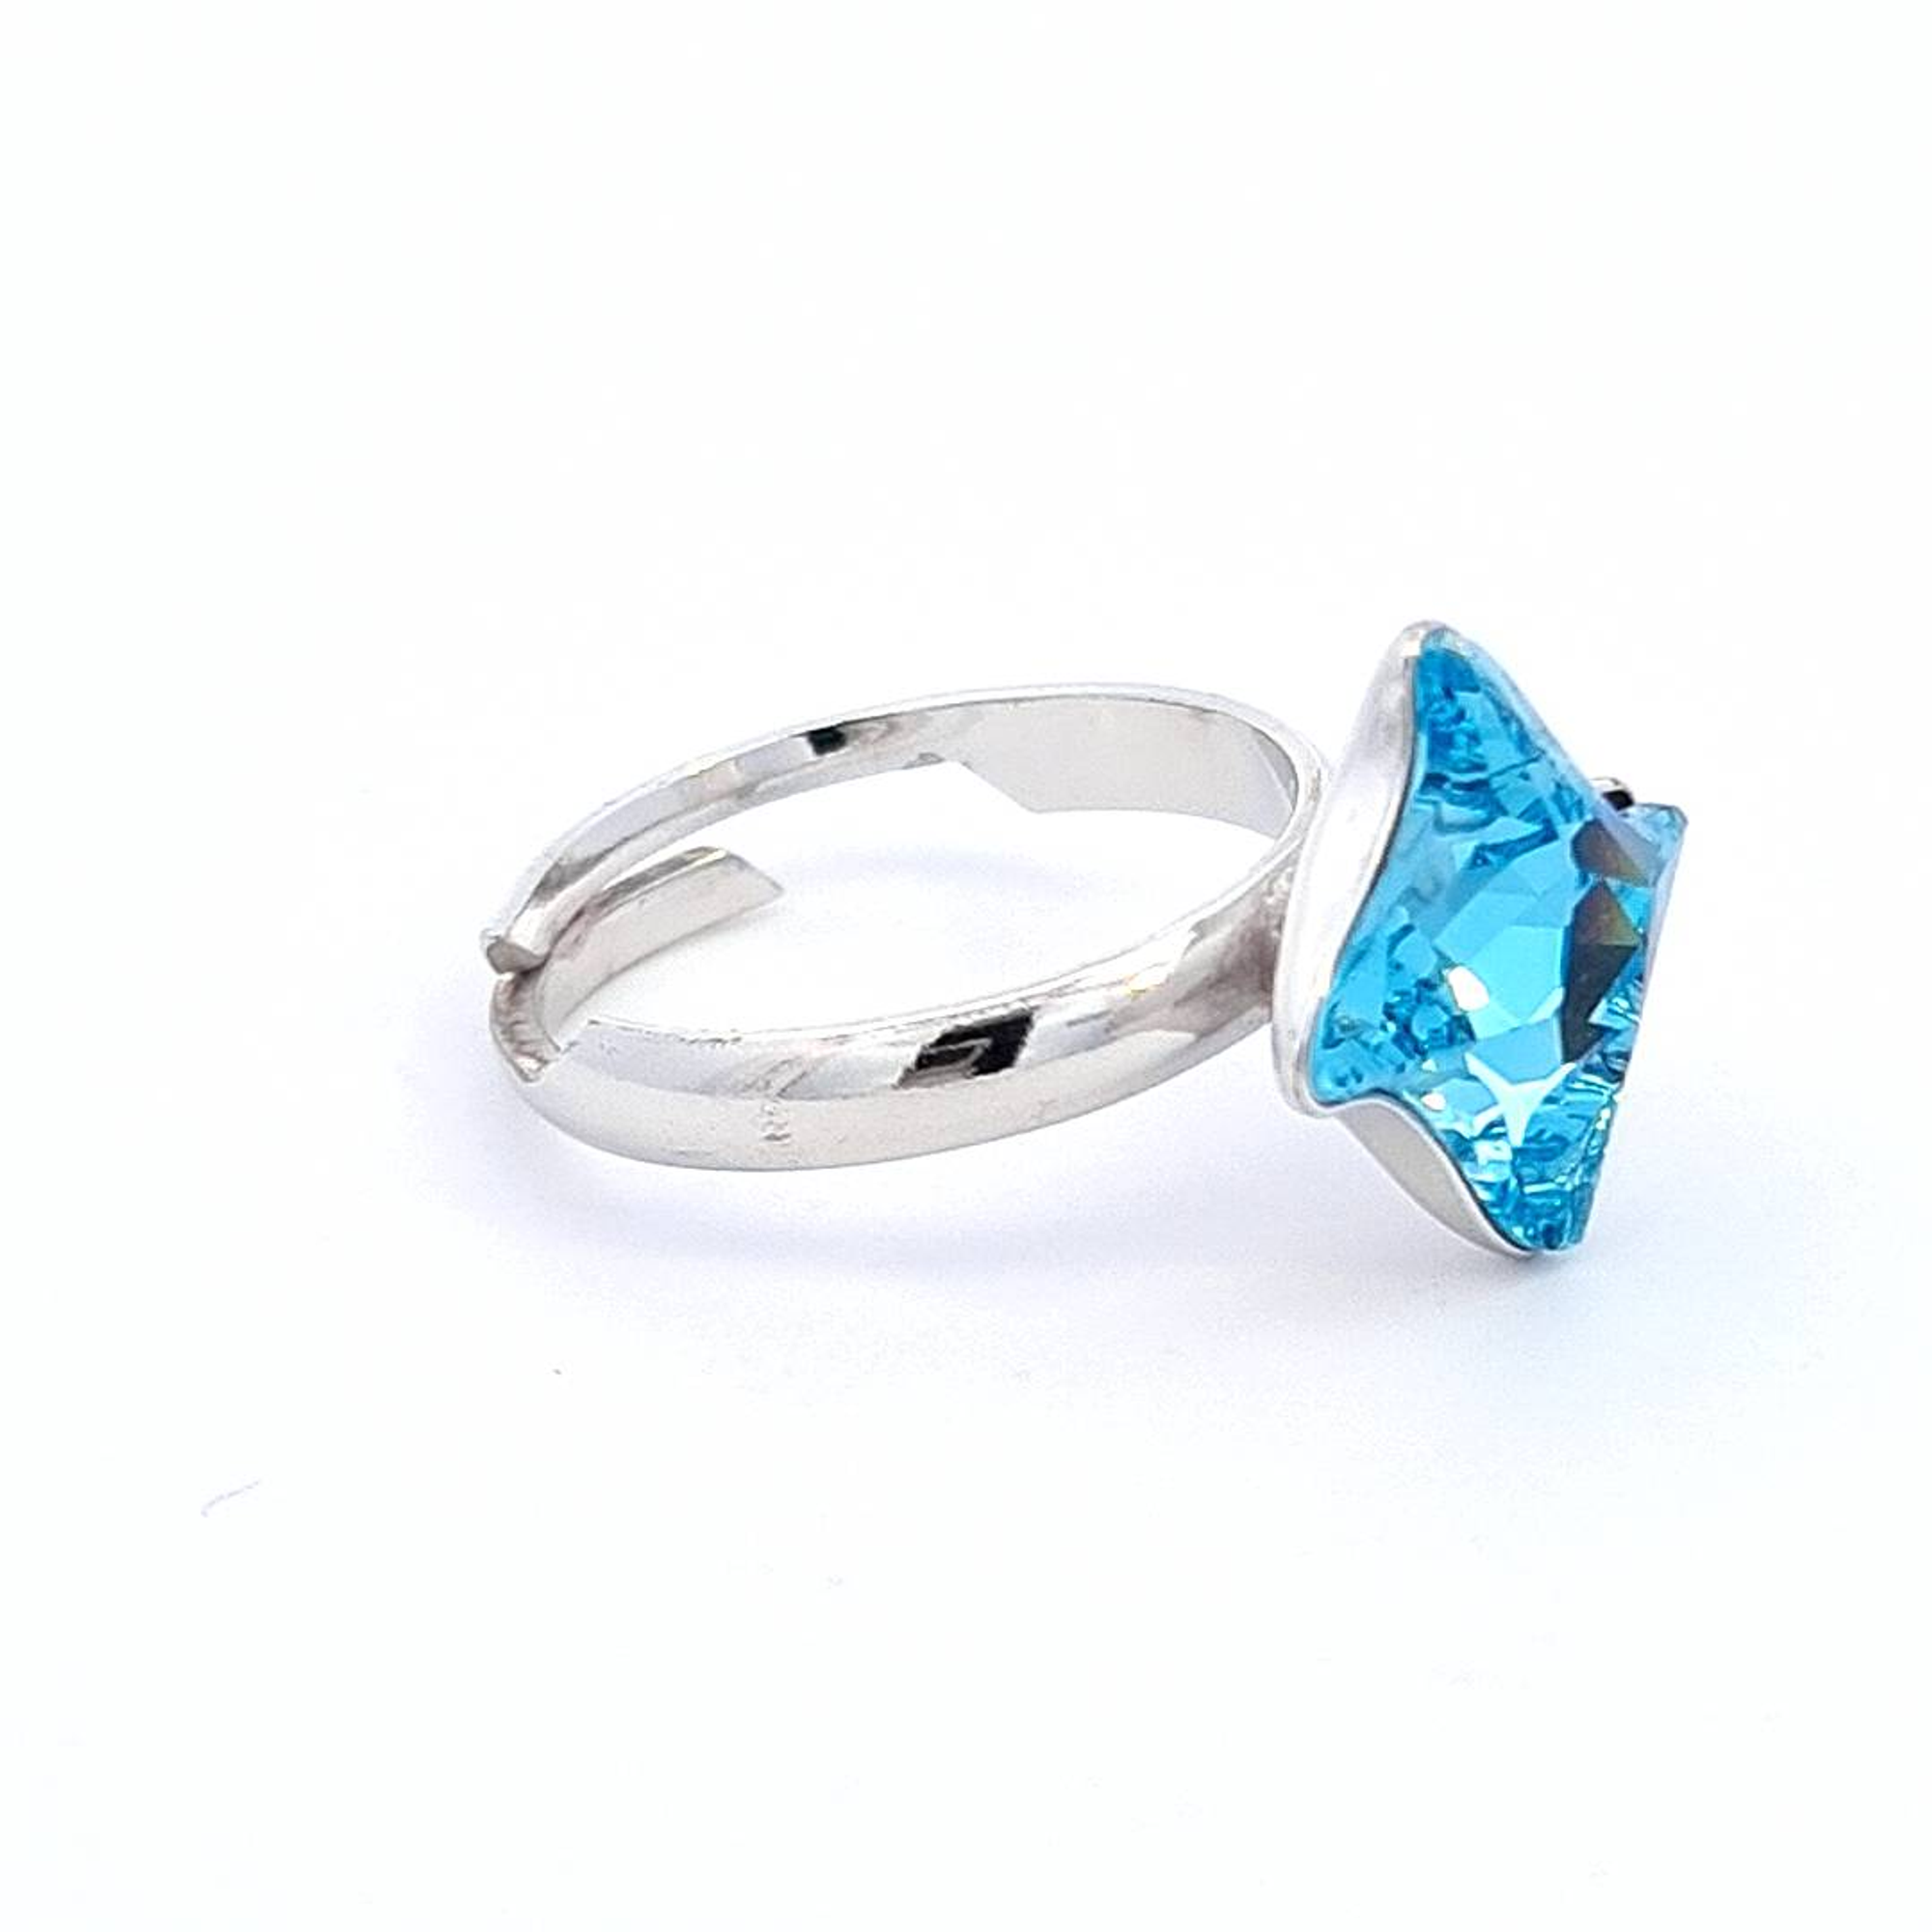 Side profile of the Aquamarine Solitaire Ring by Magpie Gems, featuring the intricate twister design and side-set crystals that complement the central aquamarine stone.